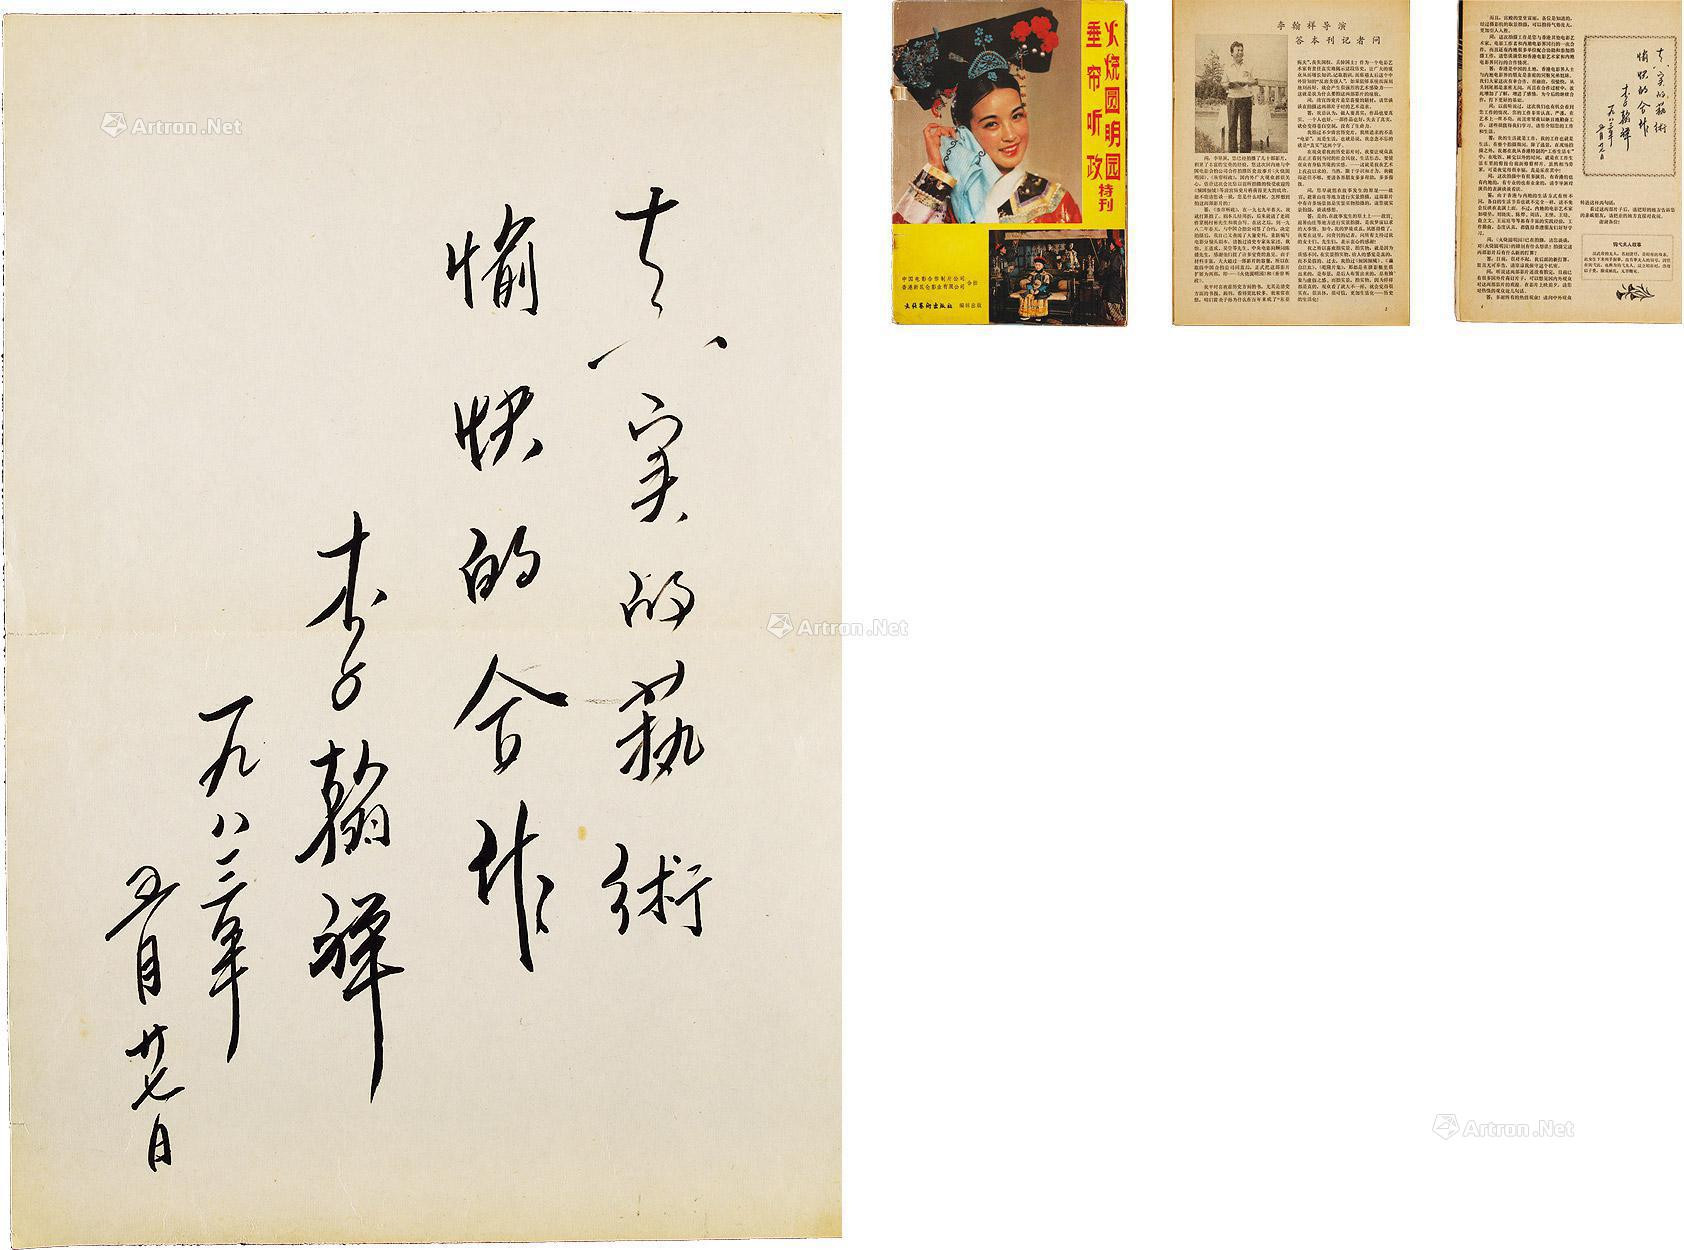 Inscription by Li Hanxiang， with one volume of publications